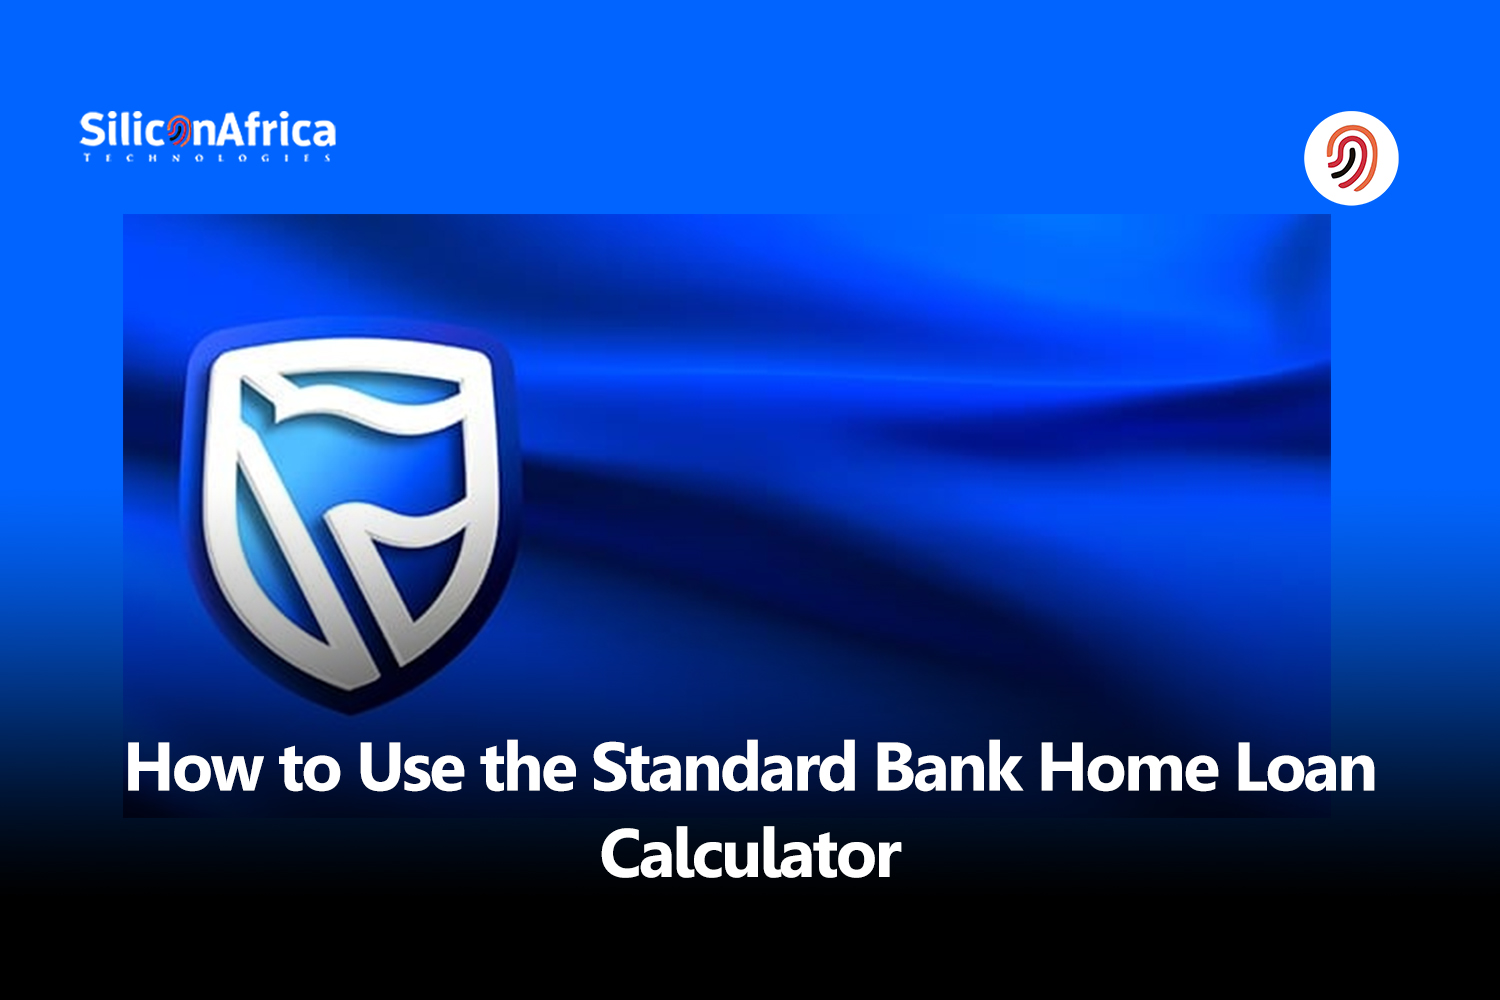 How to Use the Standard Bank Home Loan Calculator